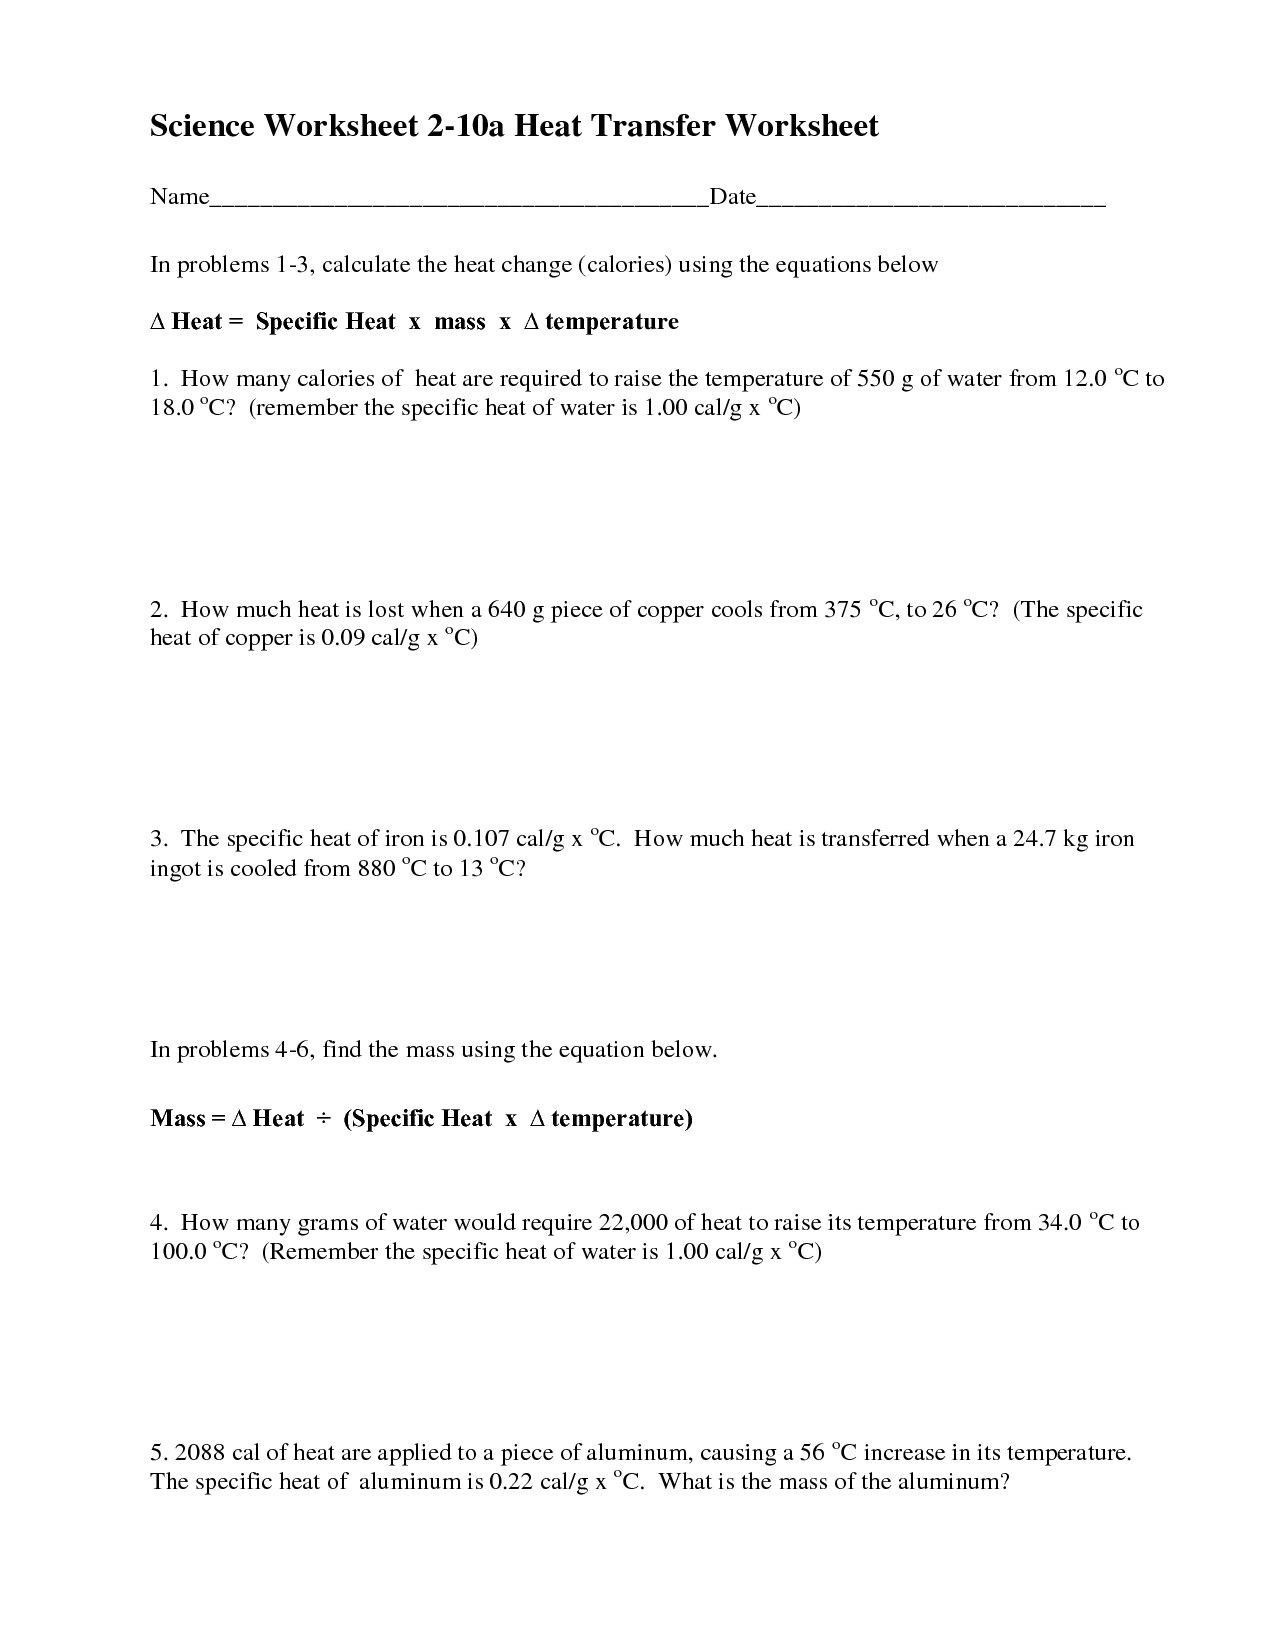 Heat Transfer Worksheet Answers Ac Plished Specific Heat Calculations Worksheet